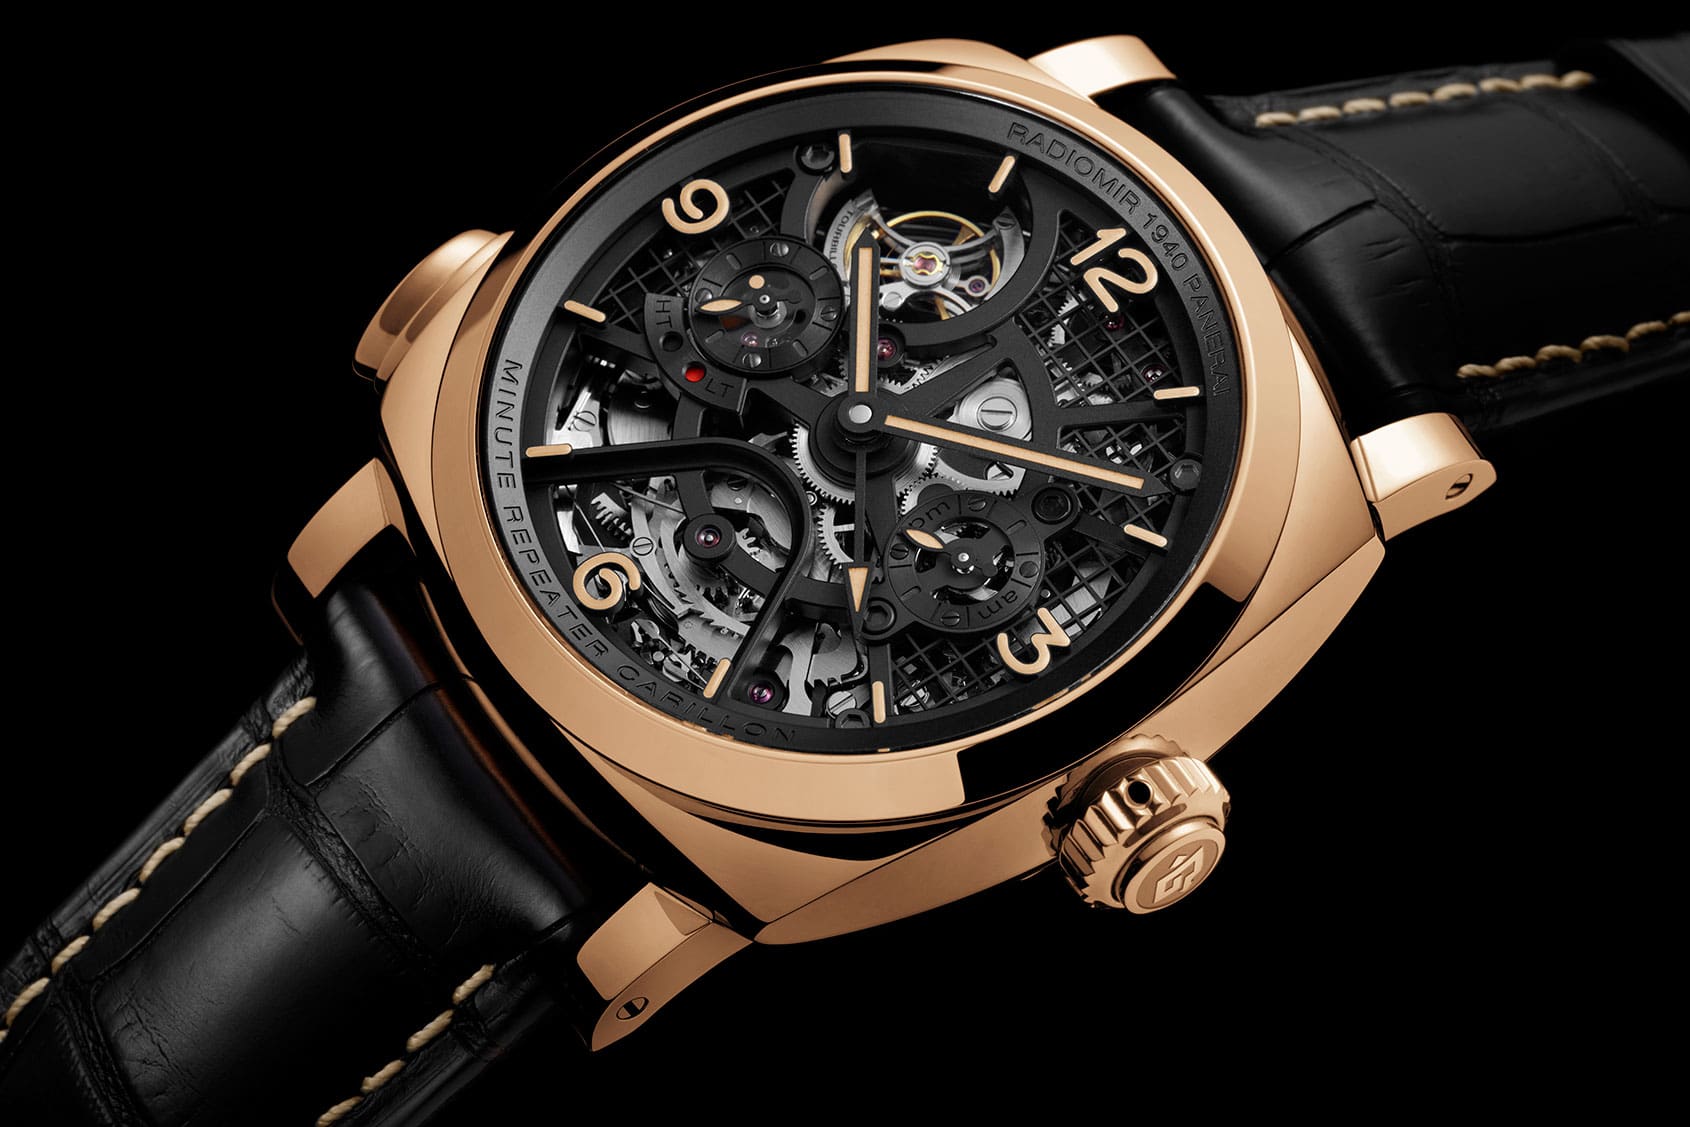 Panerai Radiomir 1940 Minute Repeater Carillon: For Whom the Bell Tolls